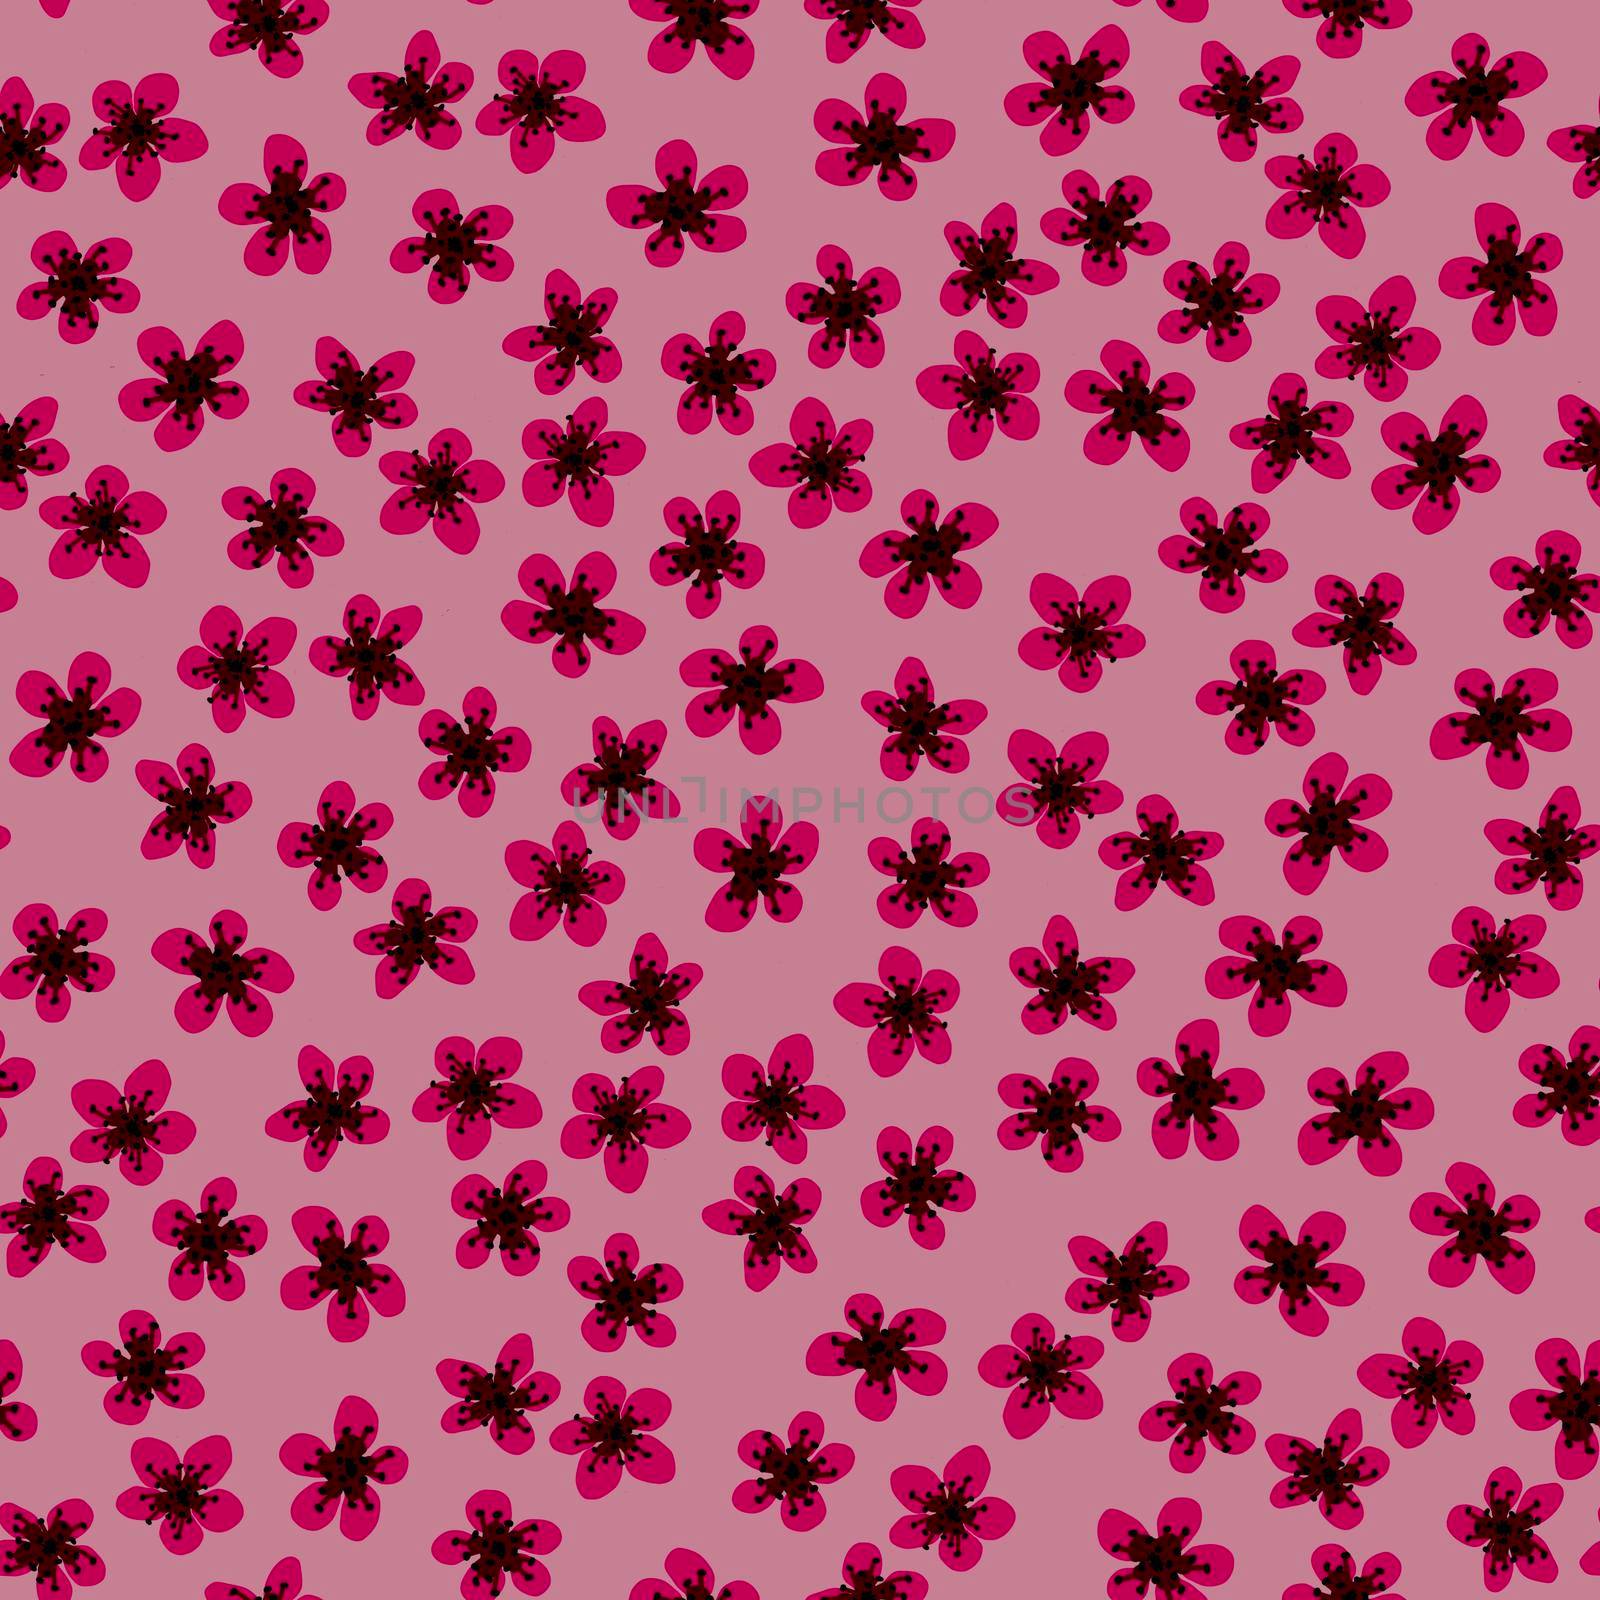 Seamless pattern with blossoming Japanese cherry sakura for fabric, packaging, wallpaper, textile decor, design, invitations, print, gift wrap, manufacturing. Fuchsia flowers on pink background